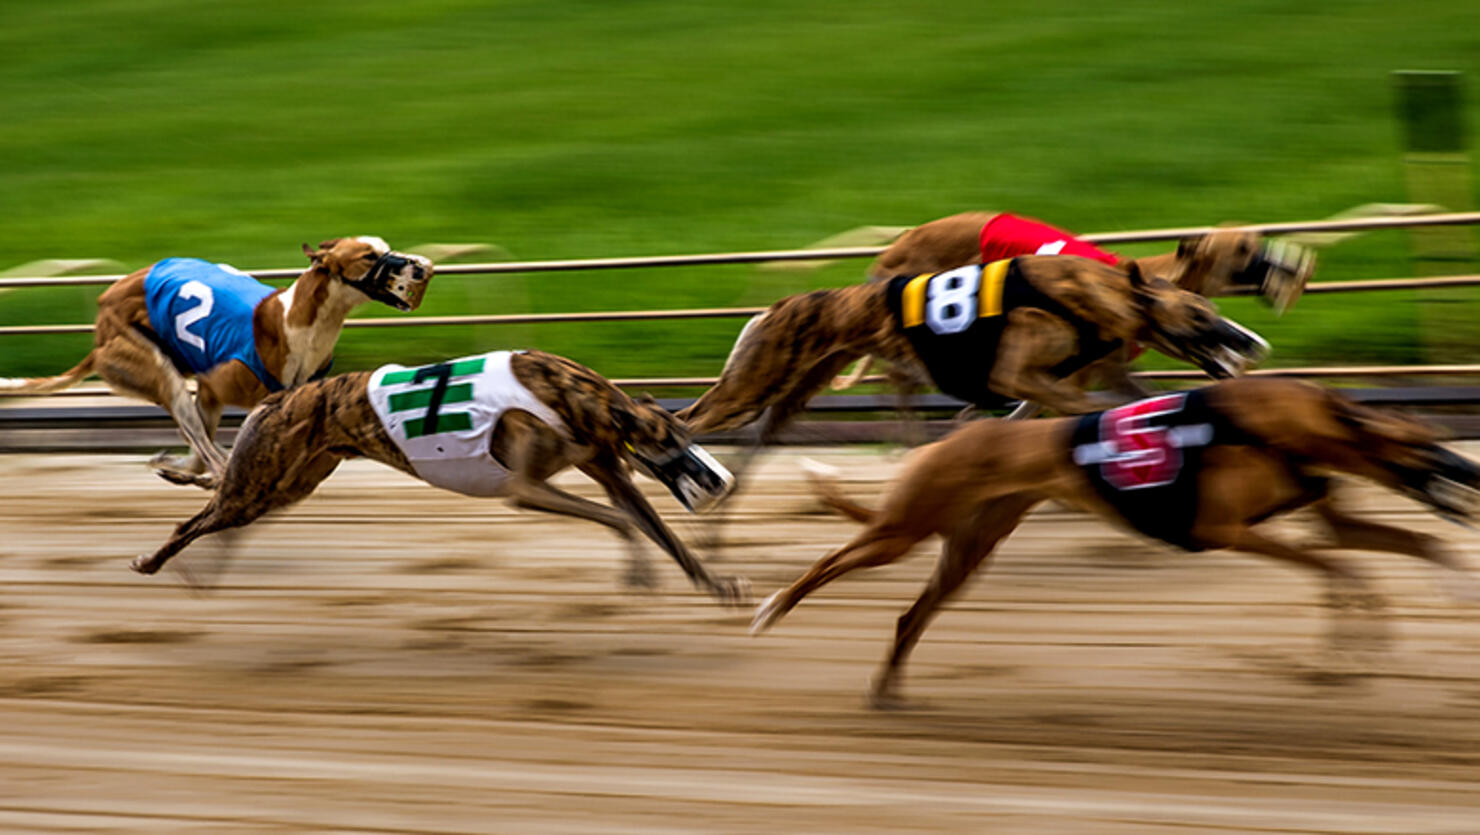 Greyhounds race by at the Sanford Orlando Kennel Club in Longwood, FL